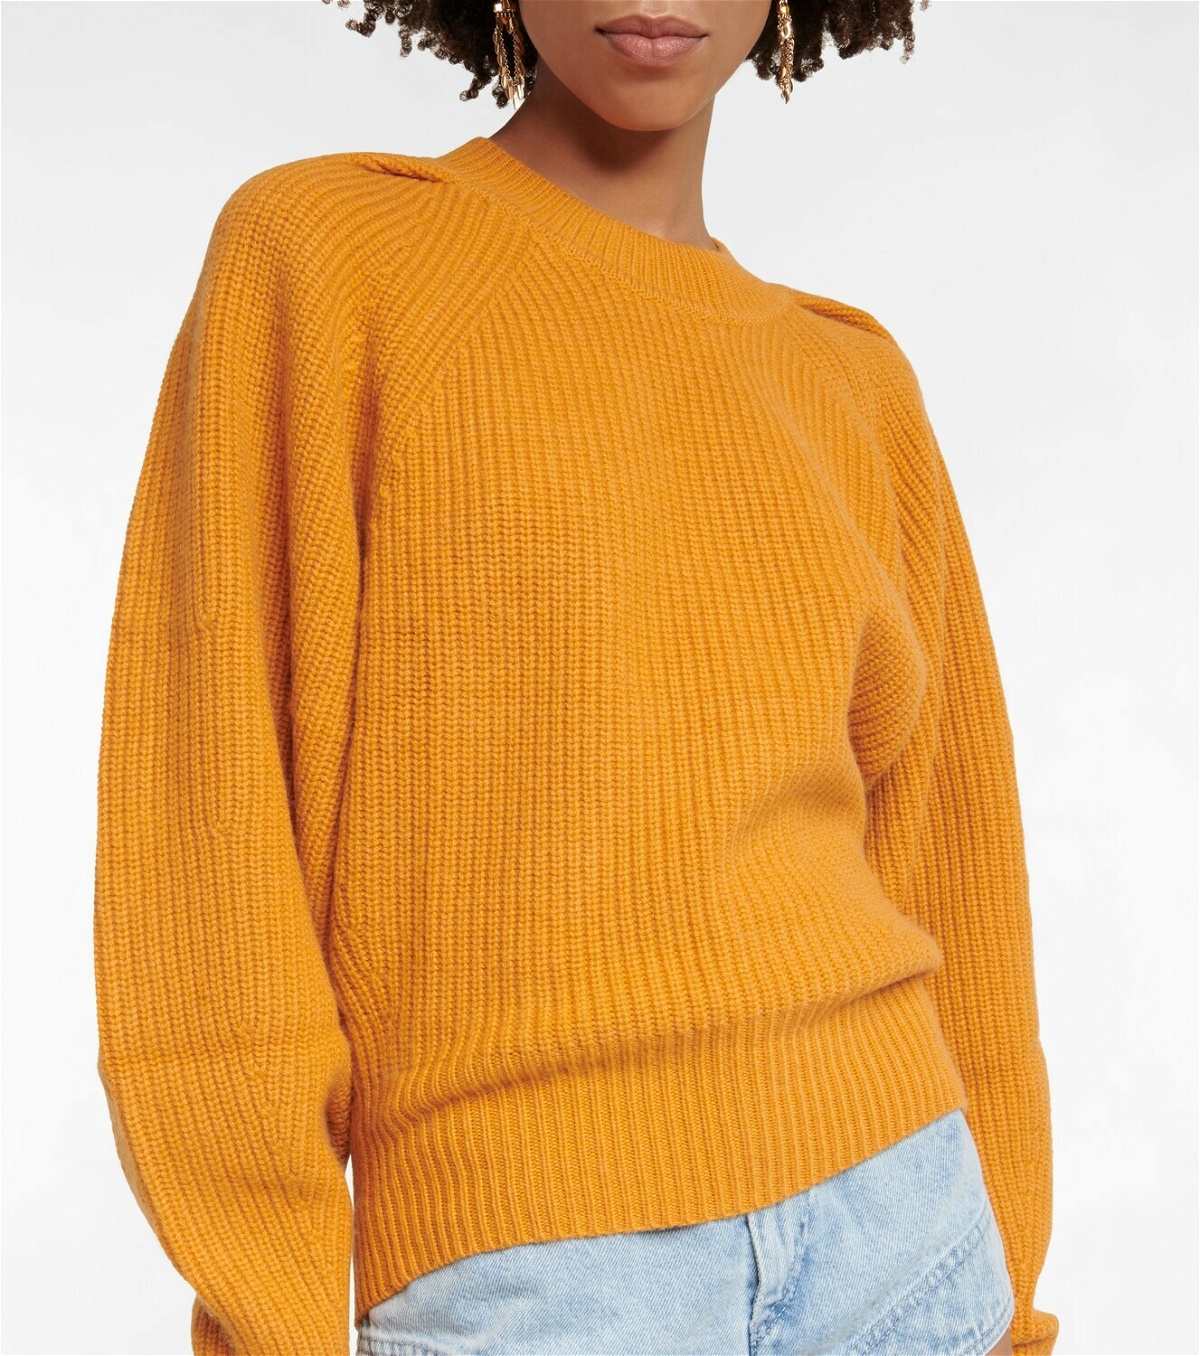 Isabel Marant - Billie wool and cashmere sweater Isabel Marant